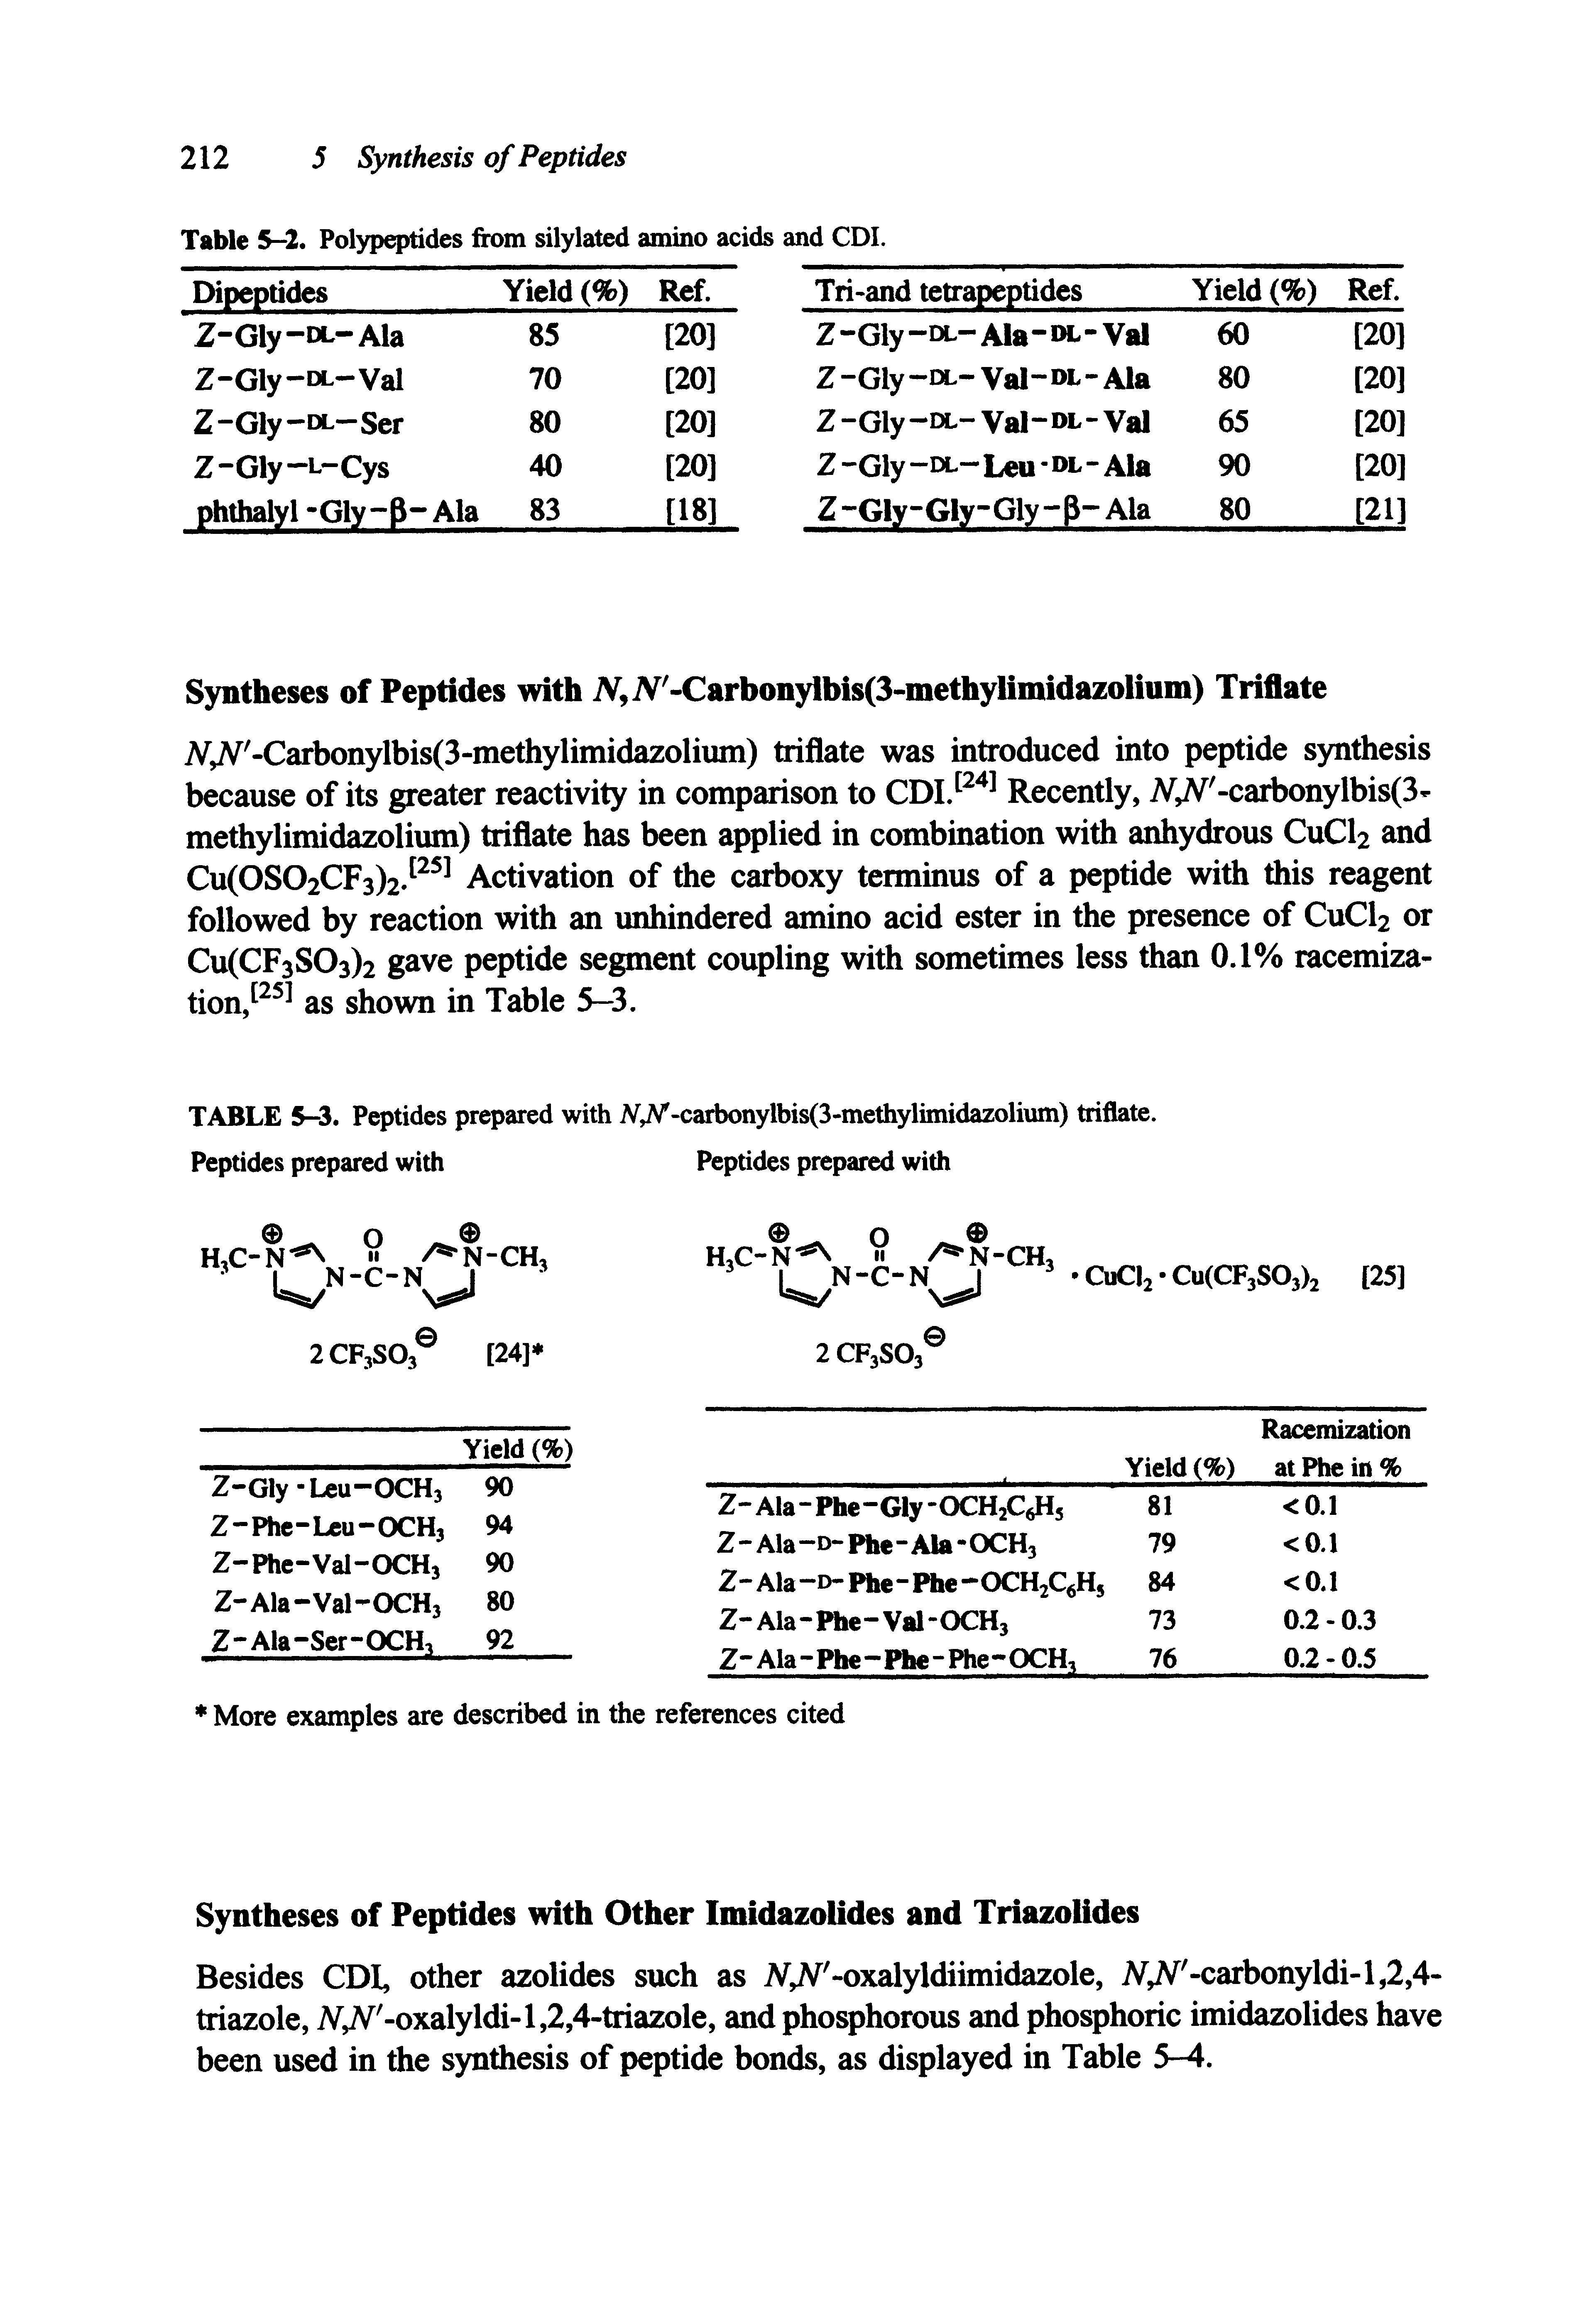 Table 5-2. Polypeptides from silylated amino acids and CDI.